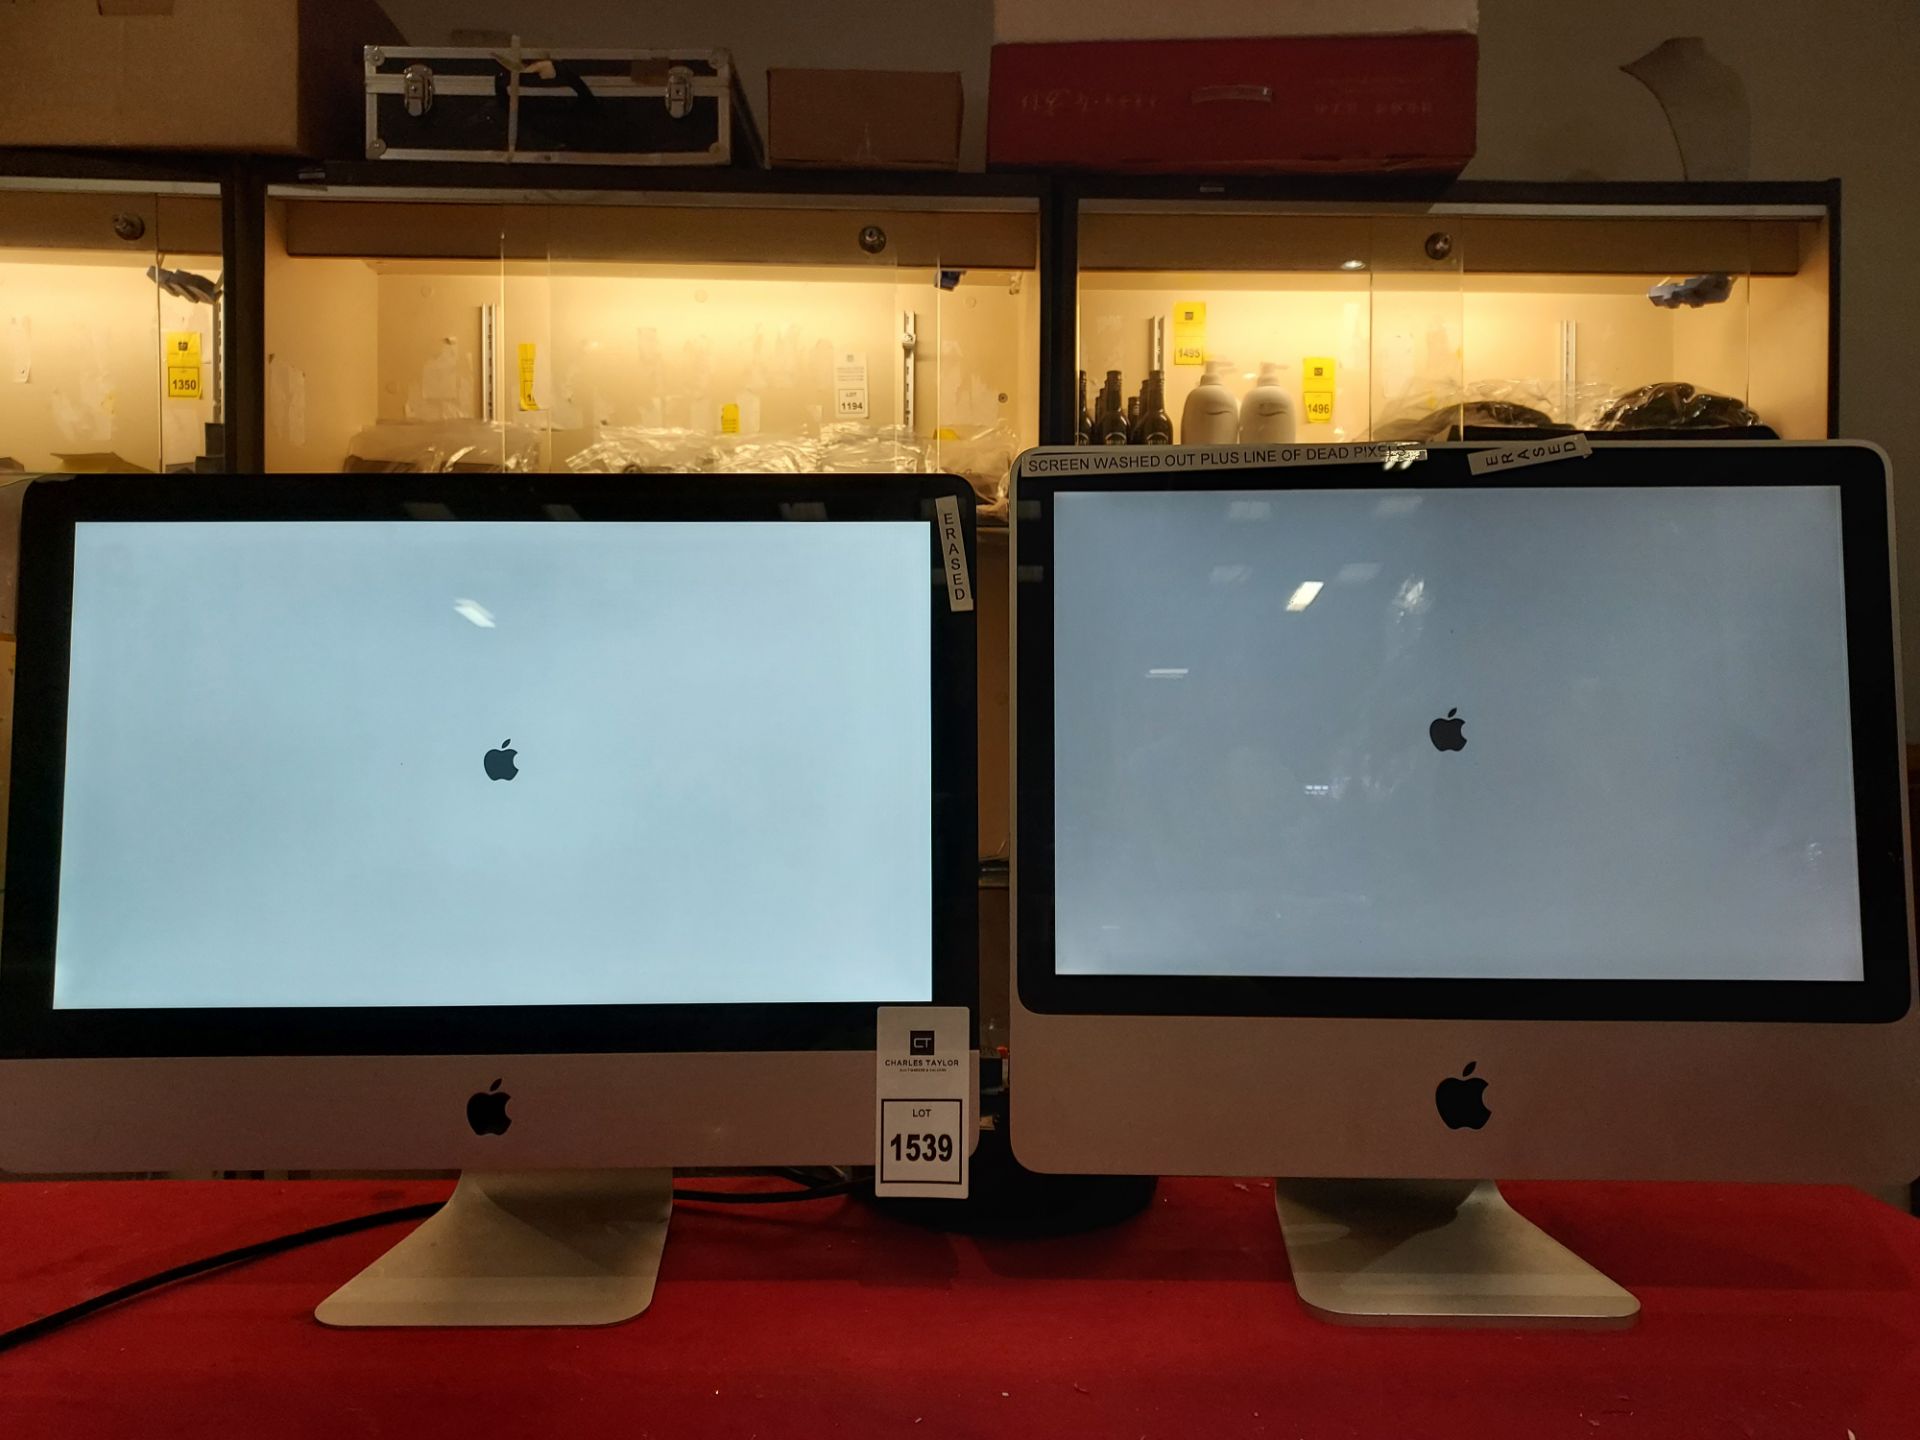 2 X IMAC COMPUTERS WITH POWER LEADS - DATA WIPED (A1311 & A1311 - NOTE THIS ONE SCREEN WASHES